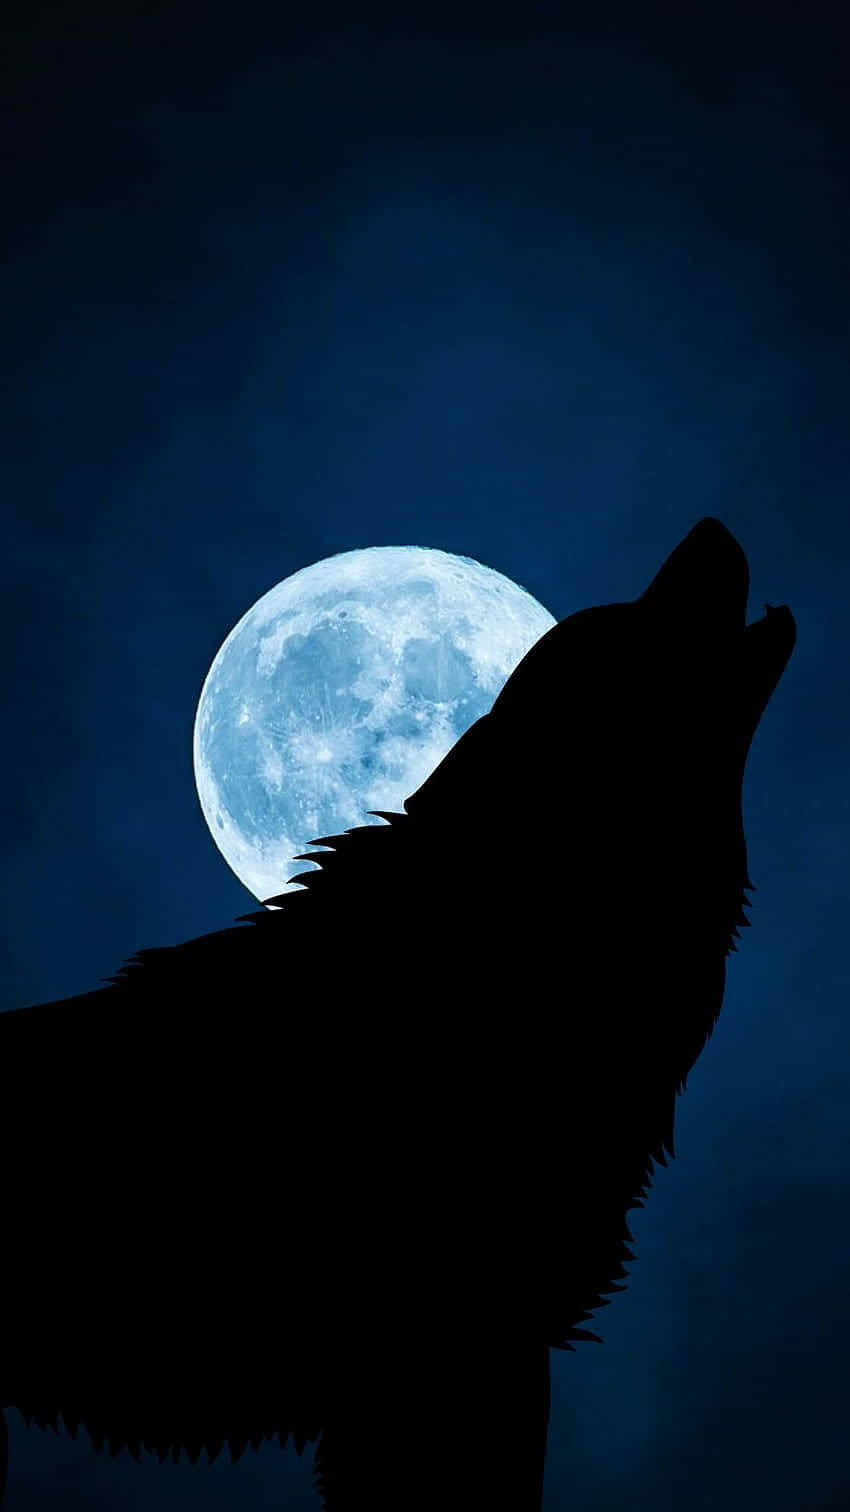 Majestic Wolf Silhouette Against a Starry Night Sky Wallpaper